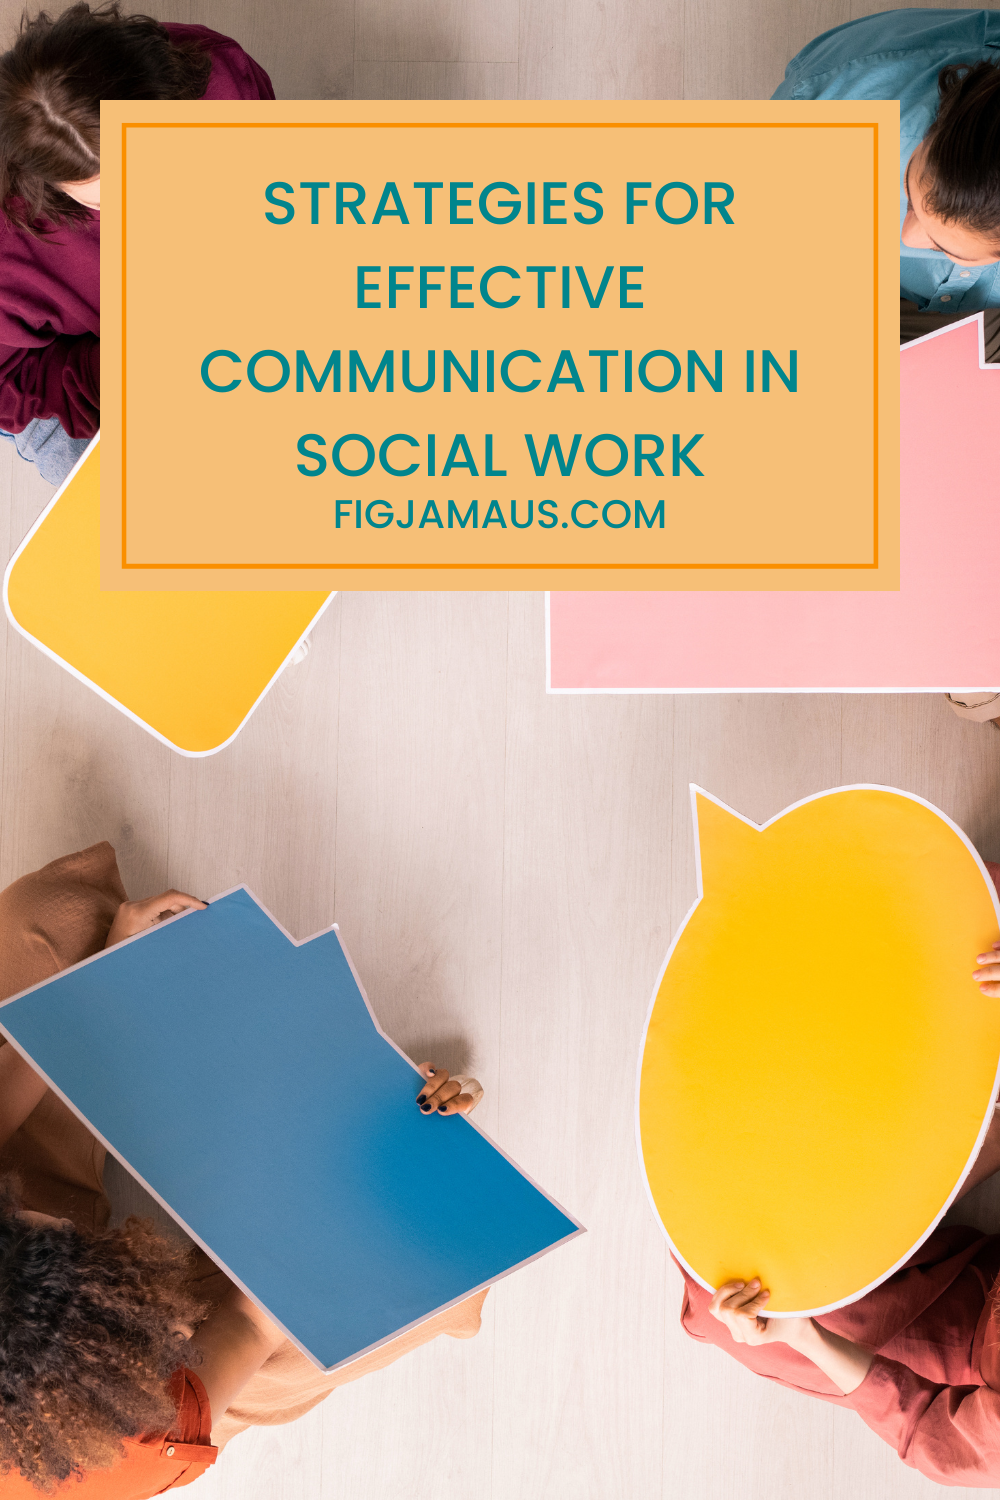 Effective communication in social work